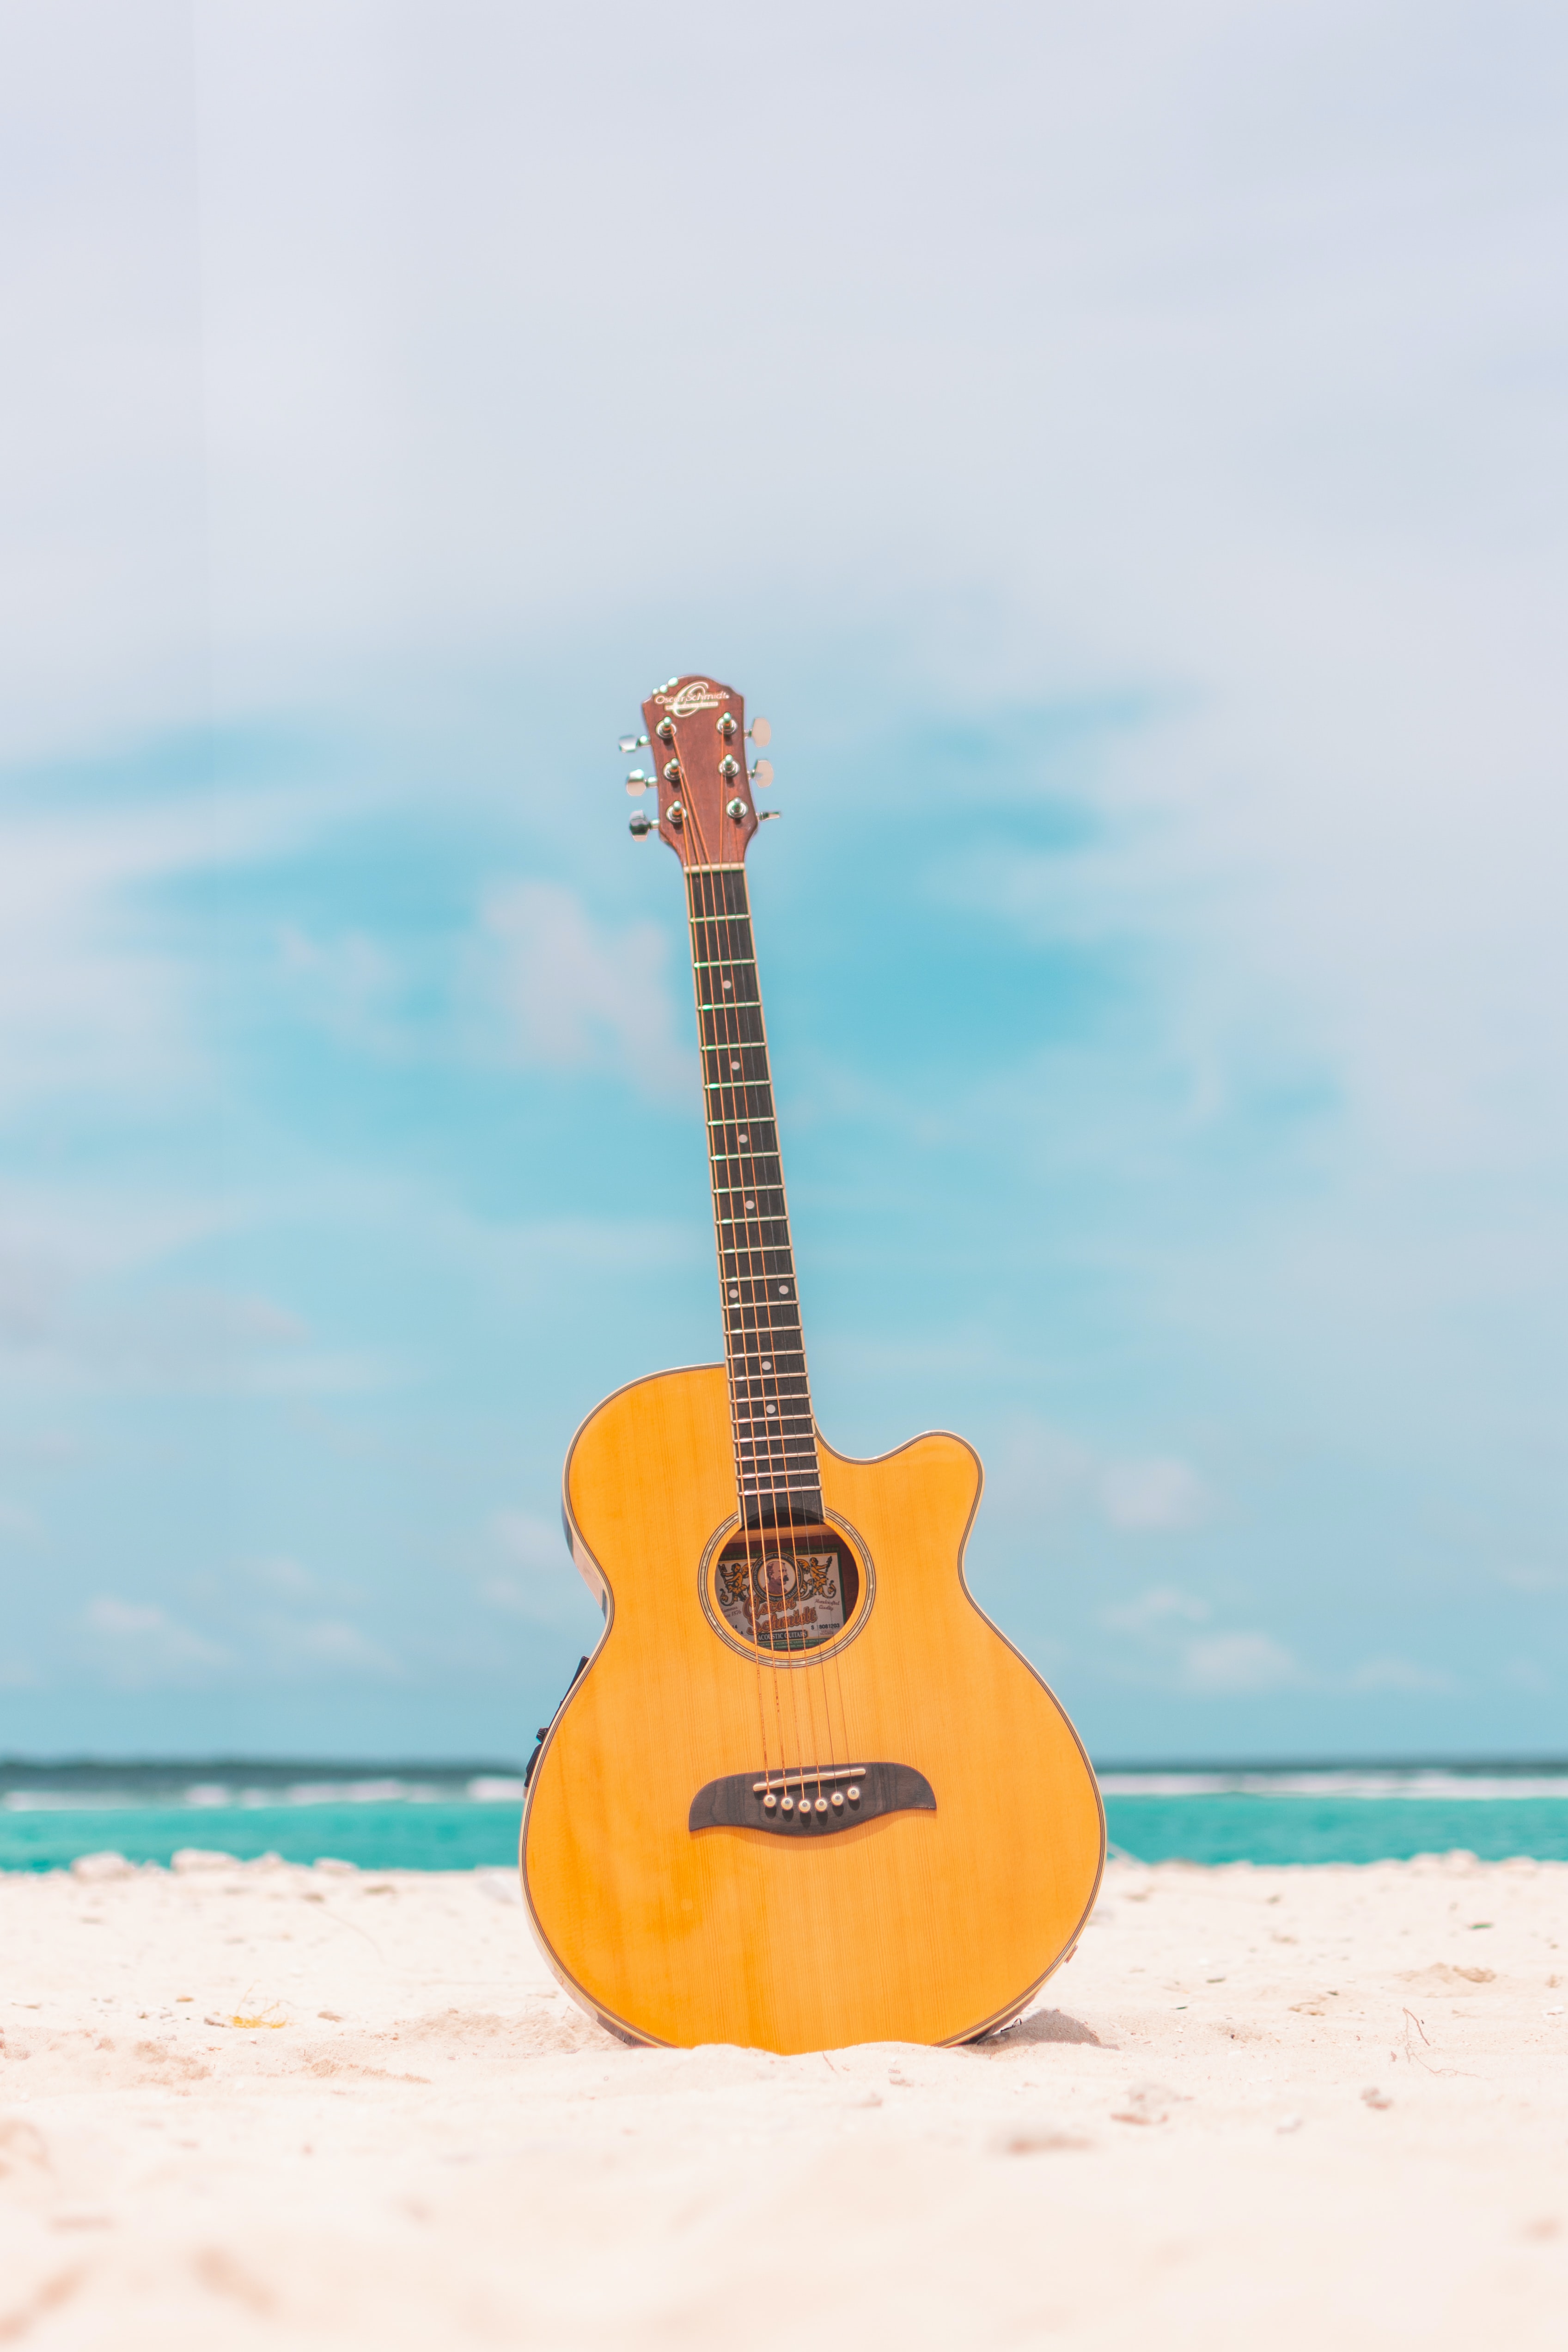 Guitar HD download for free